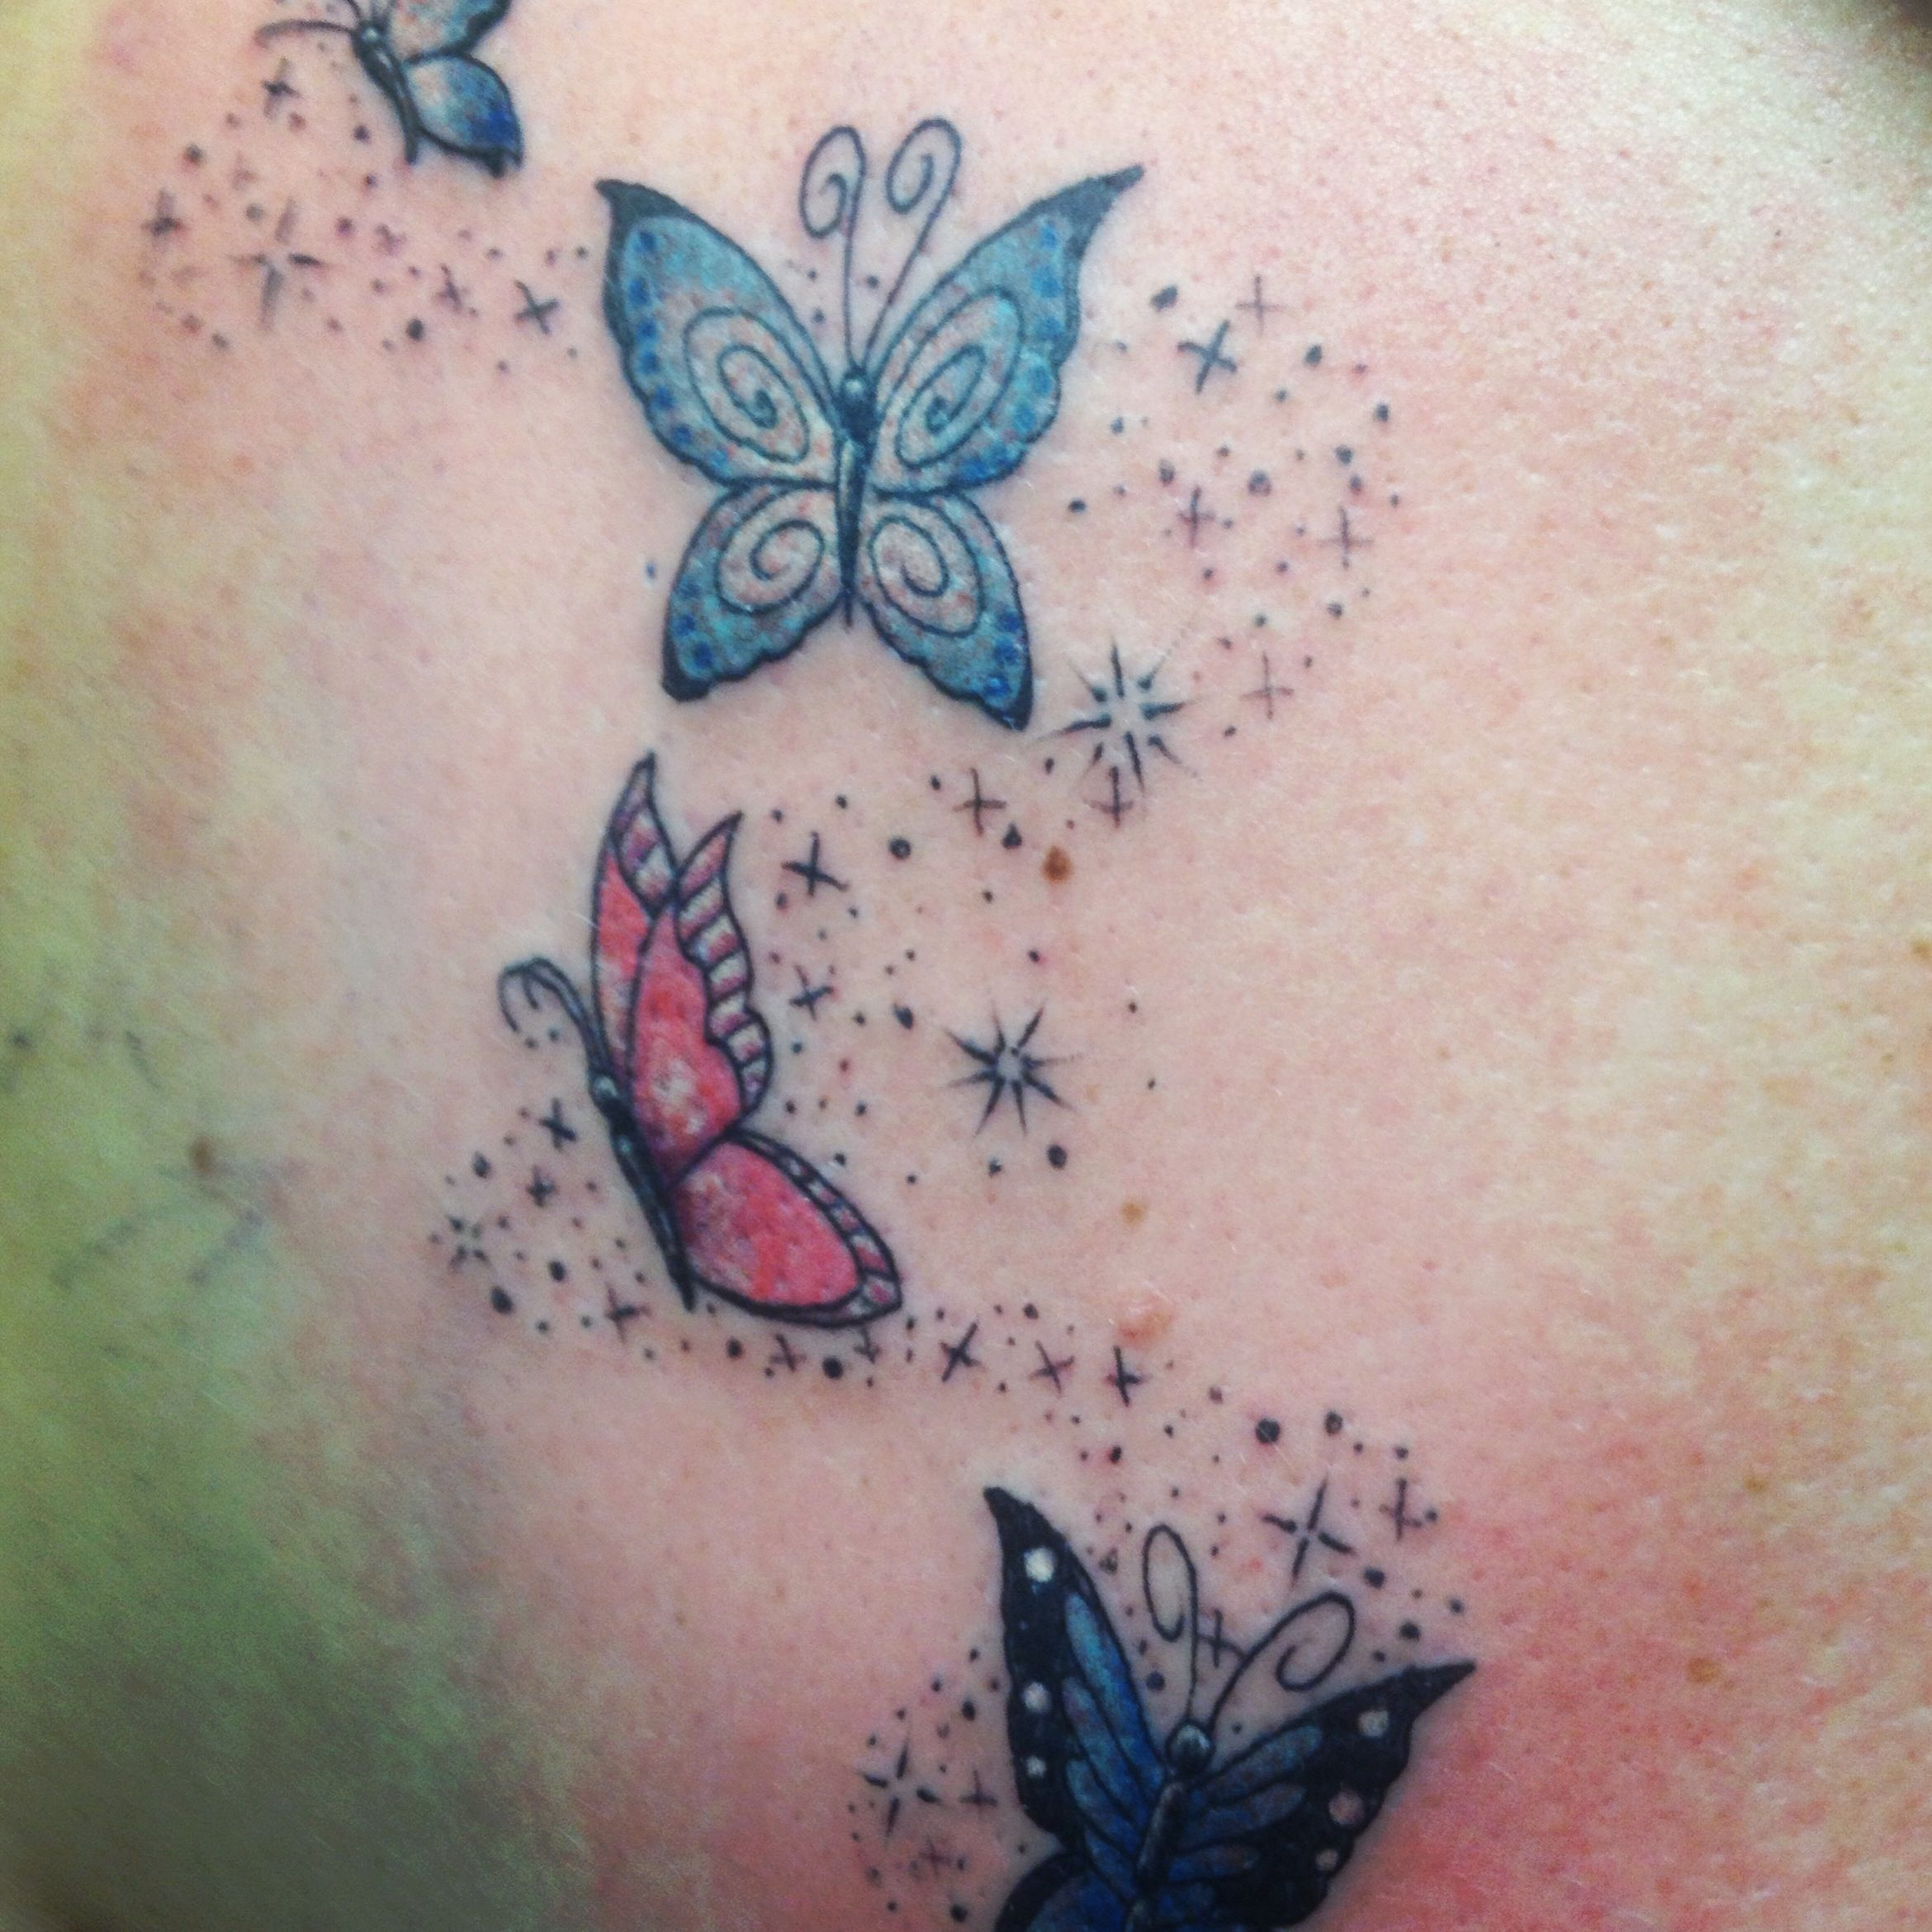 Cover Upbutterflies Tattoo Representing My Four Children 3 Boys with size 2340 X 2340